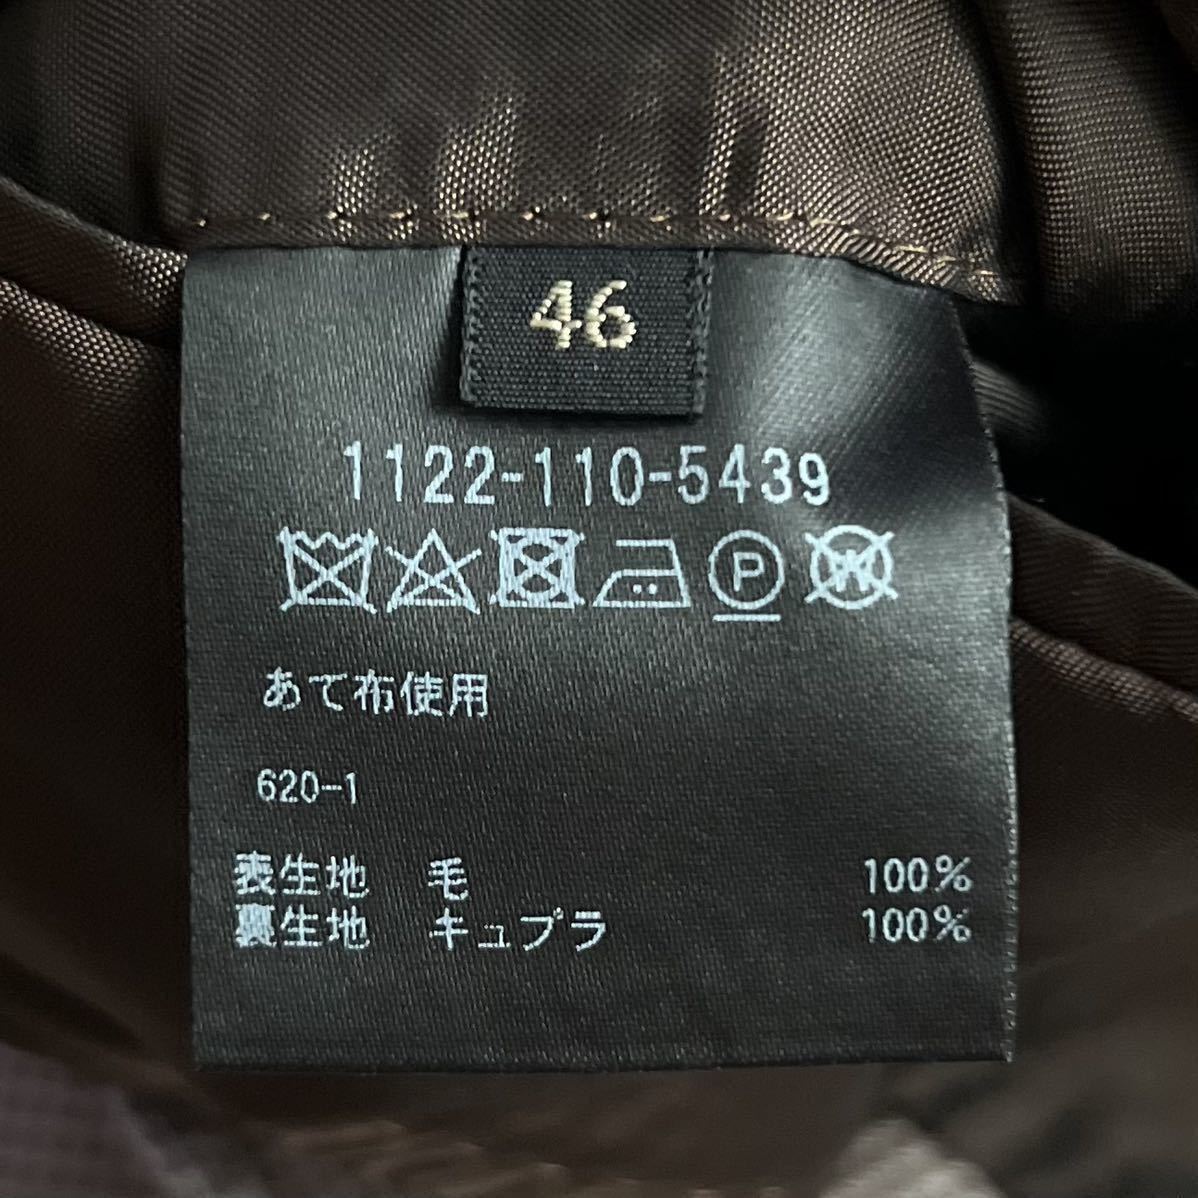  ultimate beautiful goods United Arrows is undo toe s step return .3B tailored jacket 46 unlined in the back spring summer autumn for brown group 11221105439 thousand bird ..